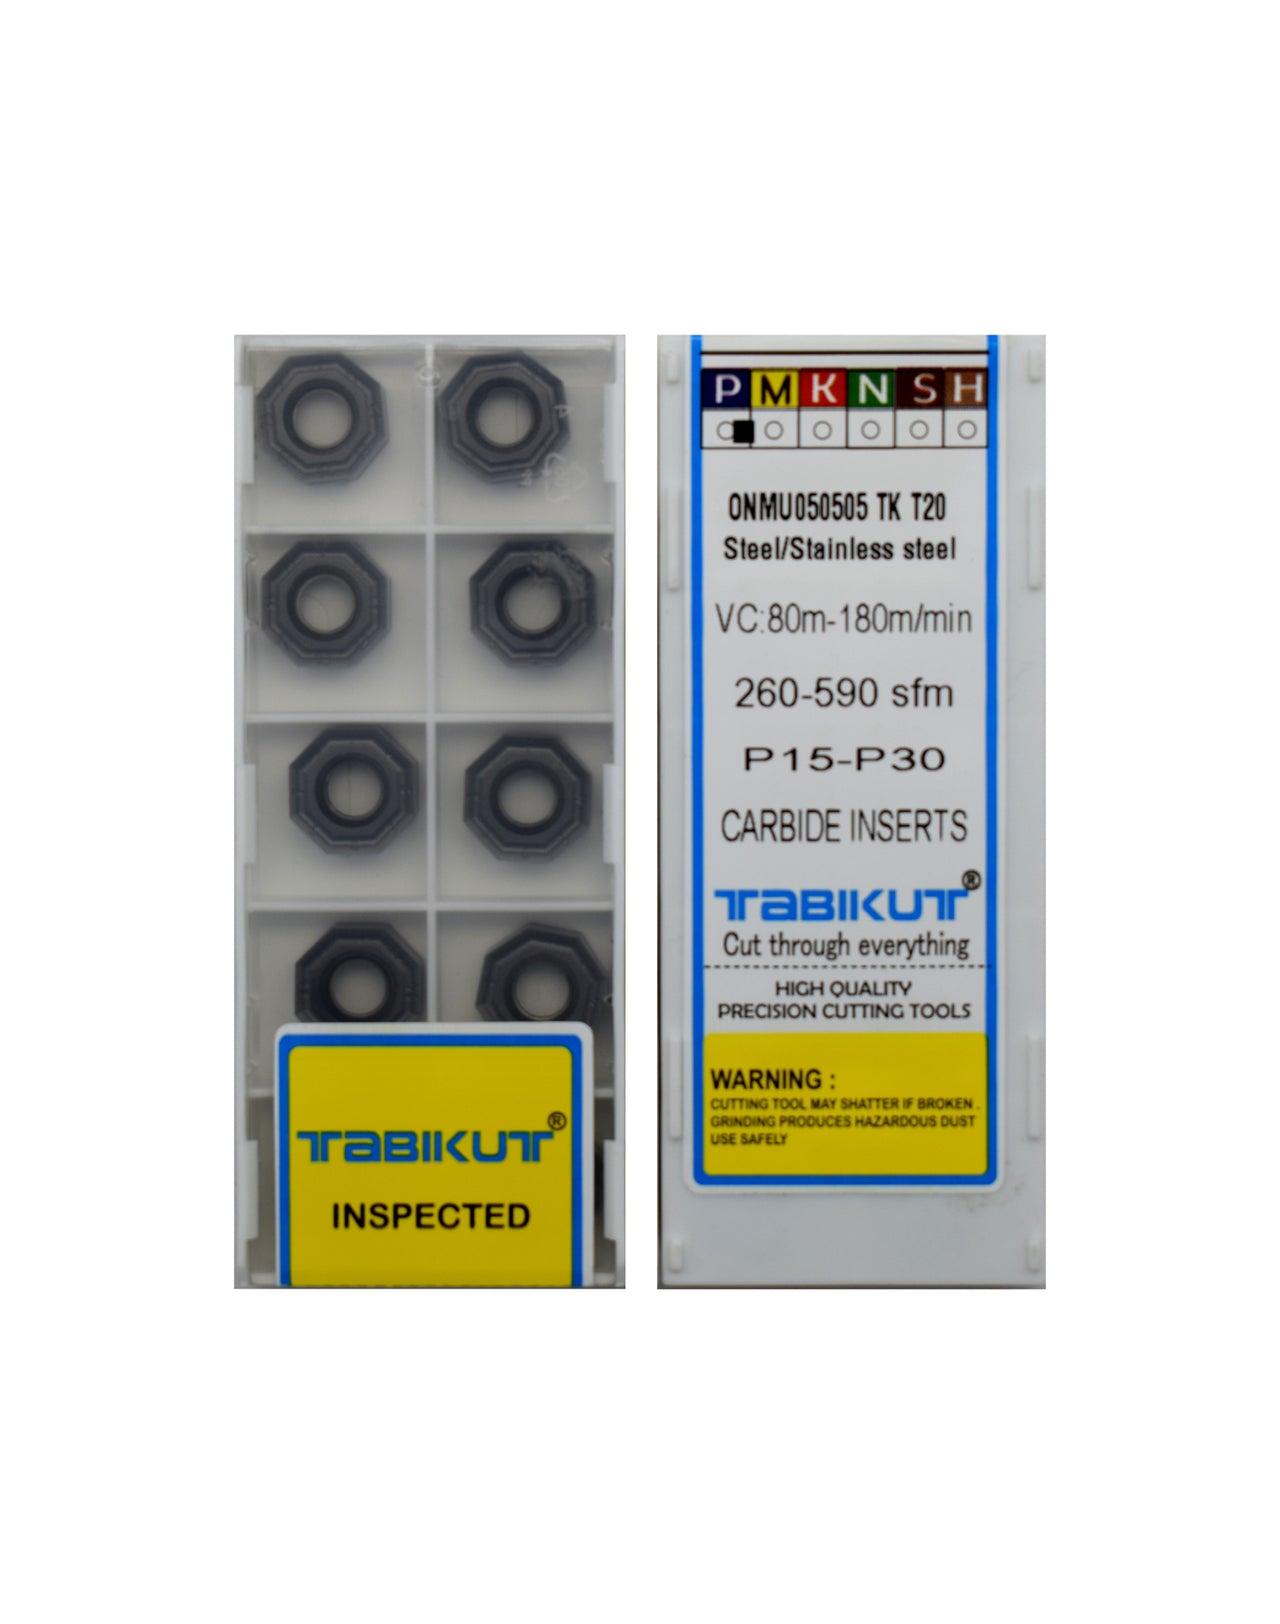 ONMU050505 T20 grade for steel and ss Tabikut insert pack of 10